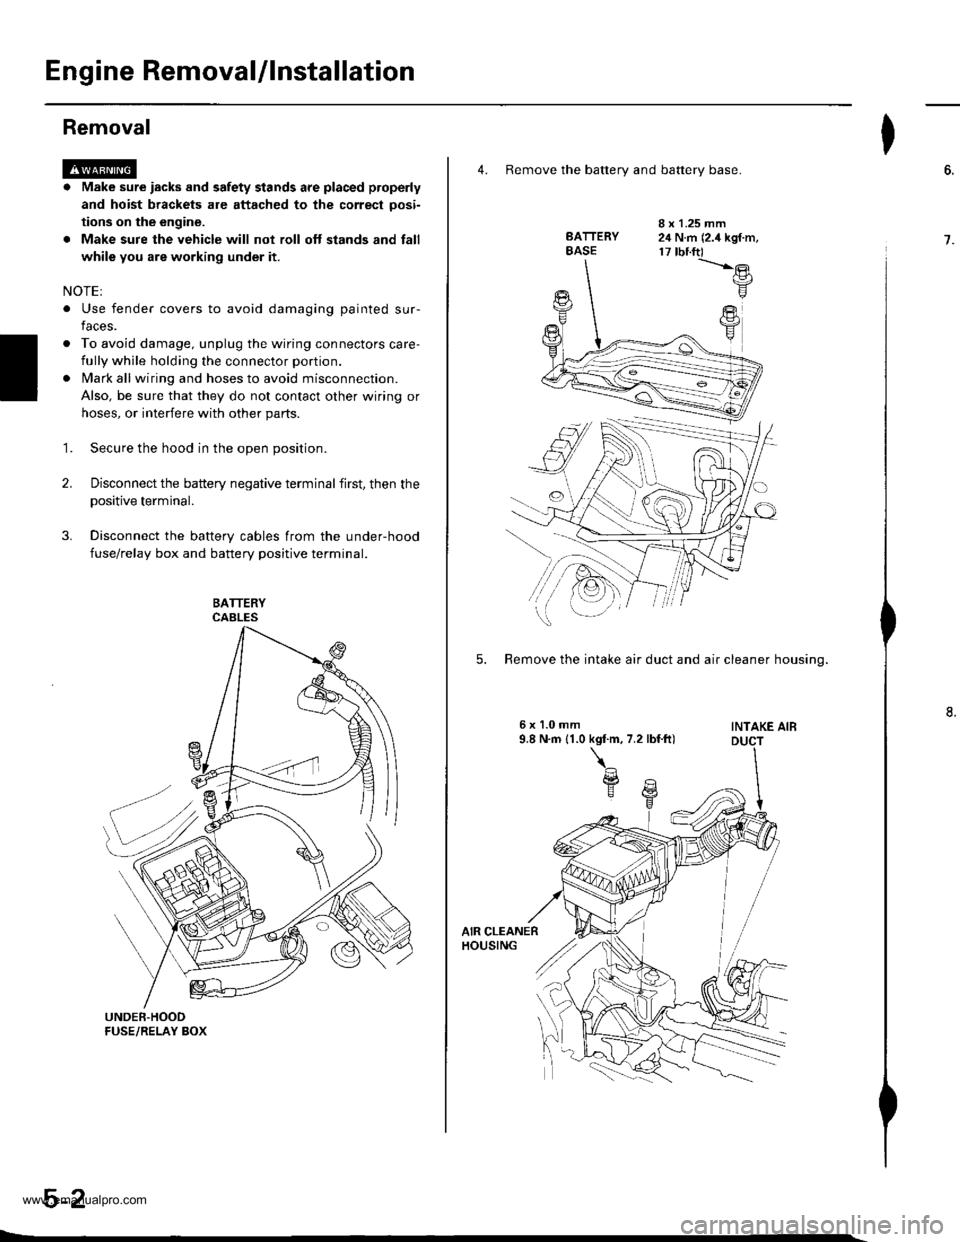 HONDA CR-V 2000 RD1-RD3 / 1.G User Guide 
Engine RemovaUlnstallation
Removal
@a Make sure iacks and safety stands are placed properly
and hoist brackets are attached to the correct oosi-
tions on the engine.
. Make sure the vehicle will not 